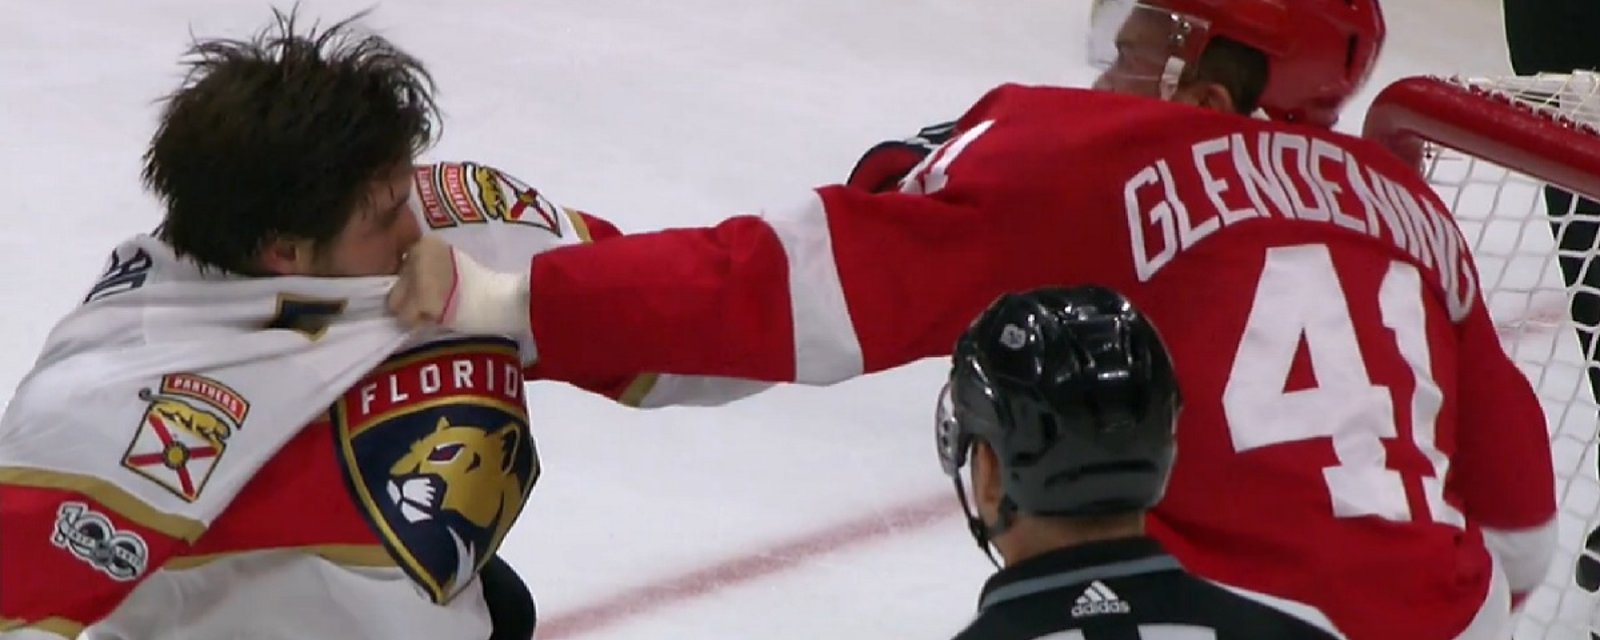 Ekblad takes several punches to the head but leaves Glendening bloody. 